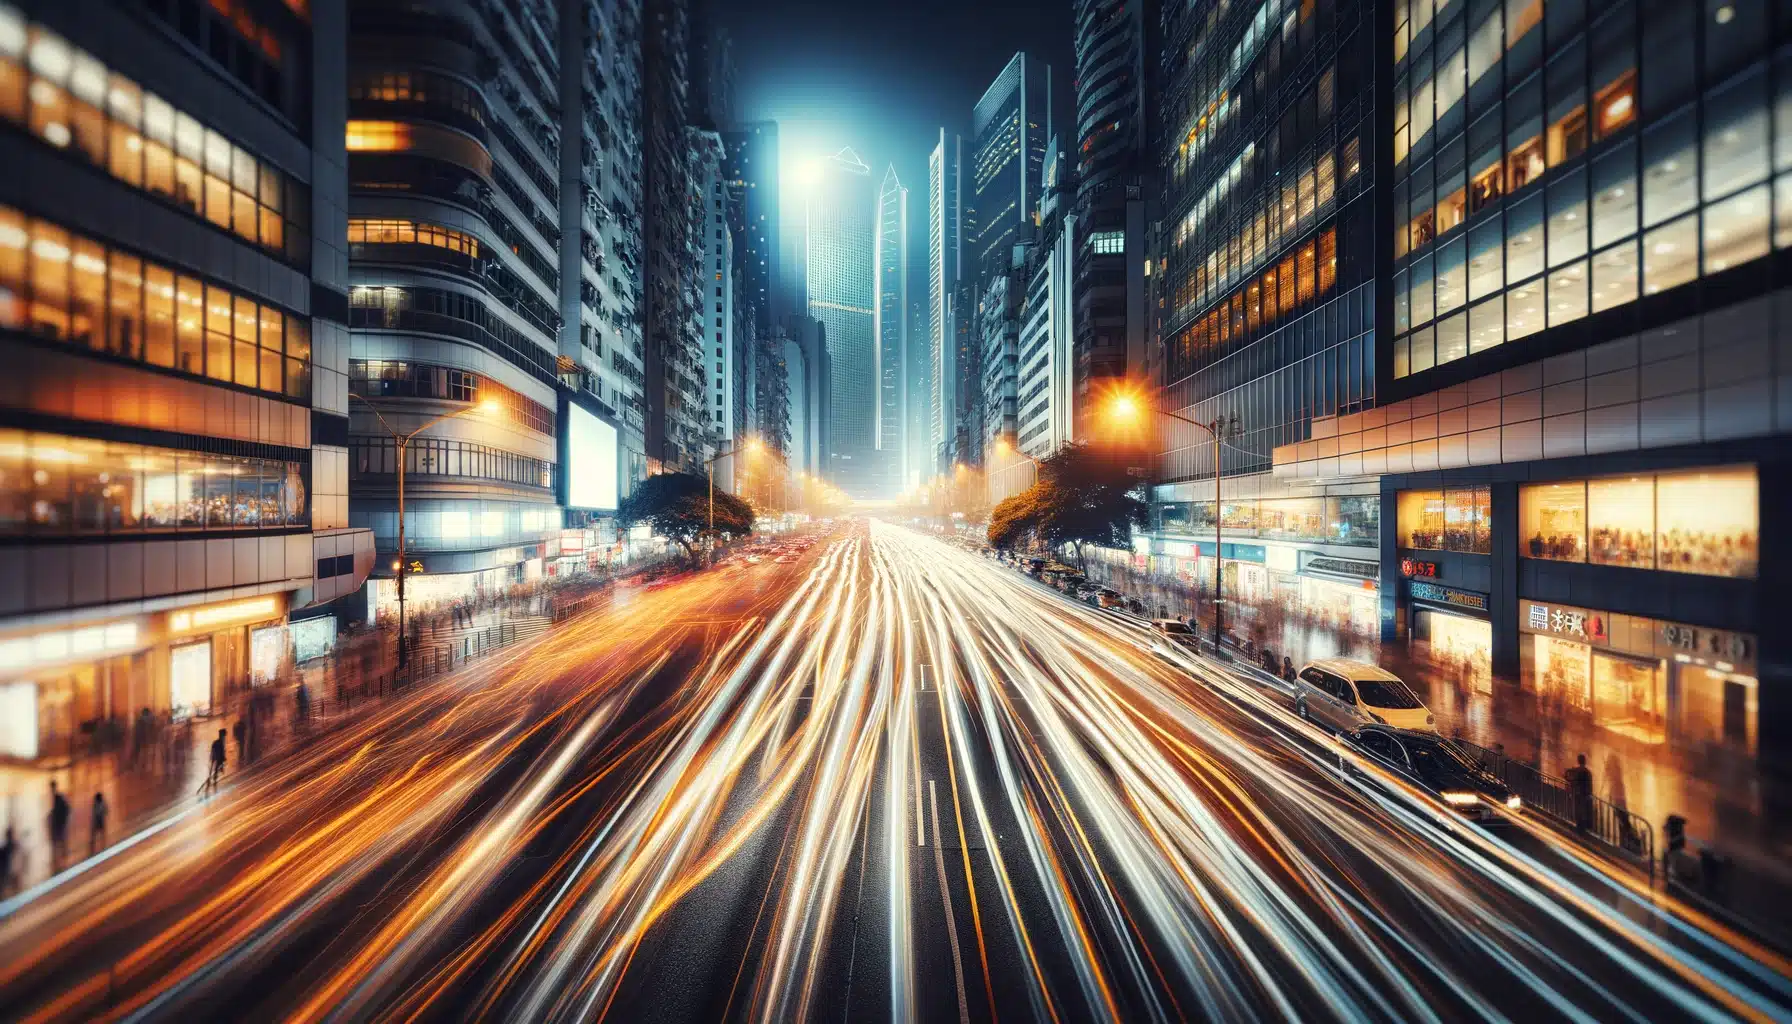 Nighttime urban street scene with locomotion unfocused effect showing the dynamic flow of cars and pedestrians.